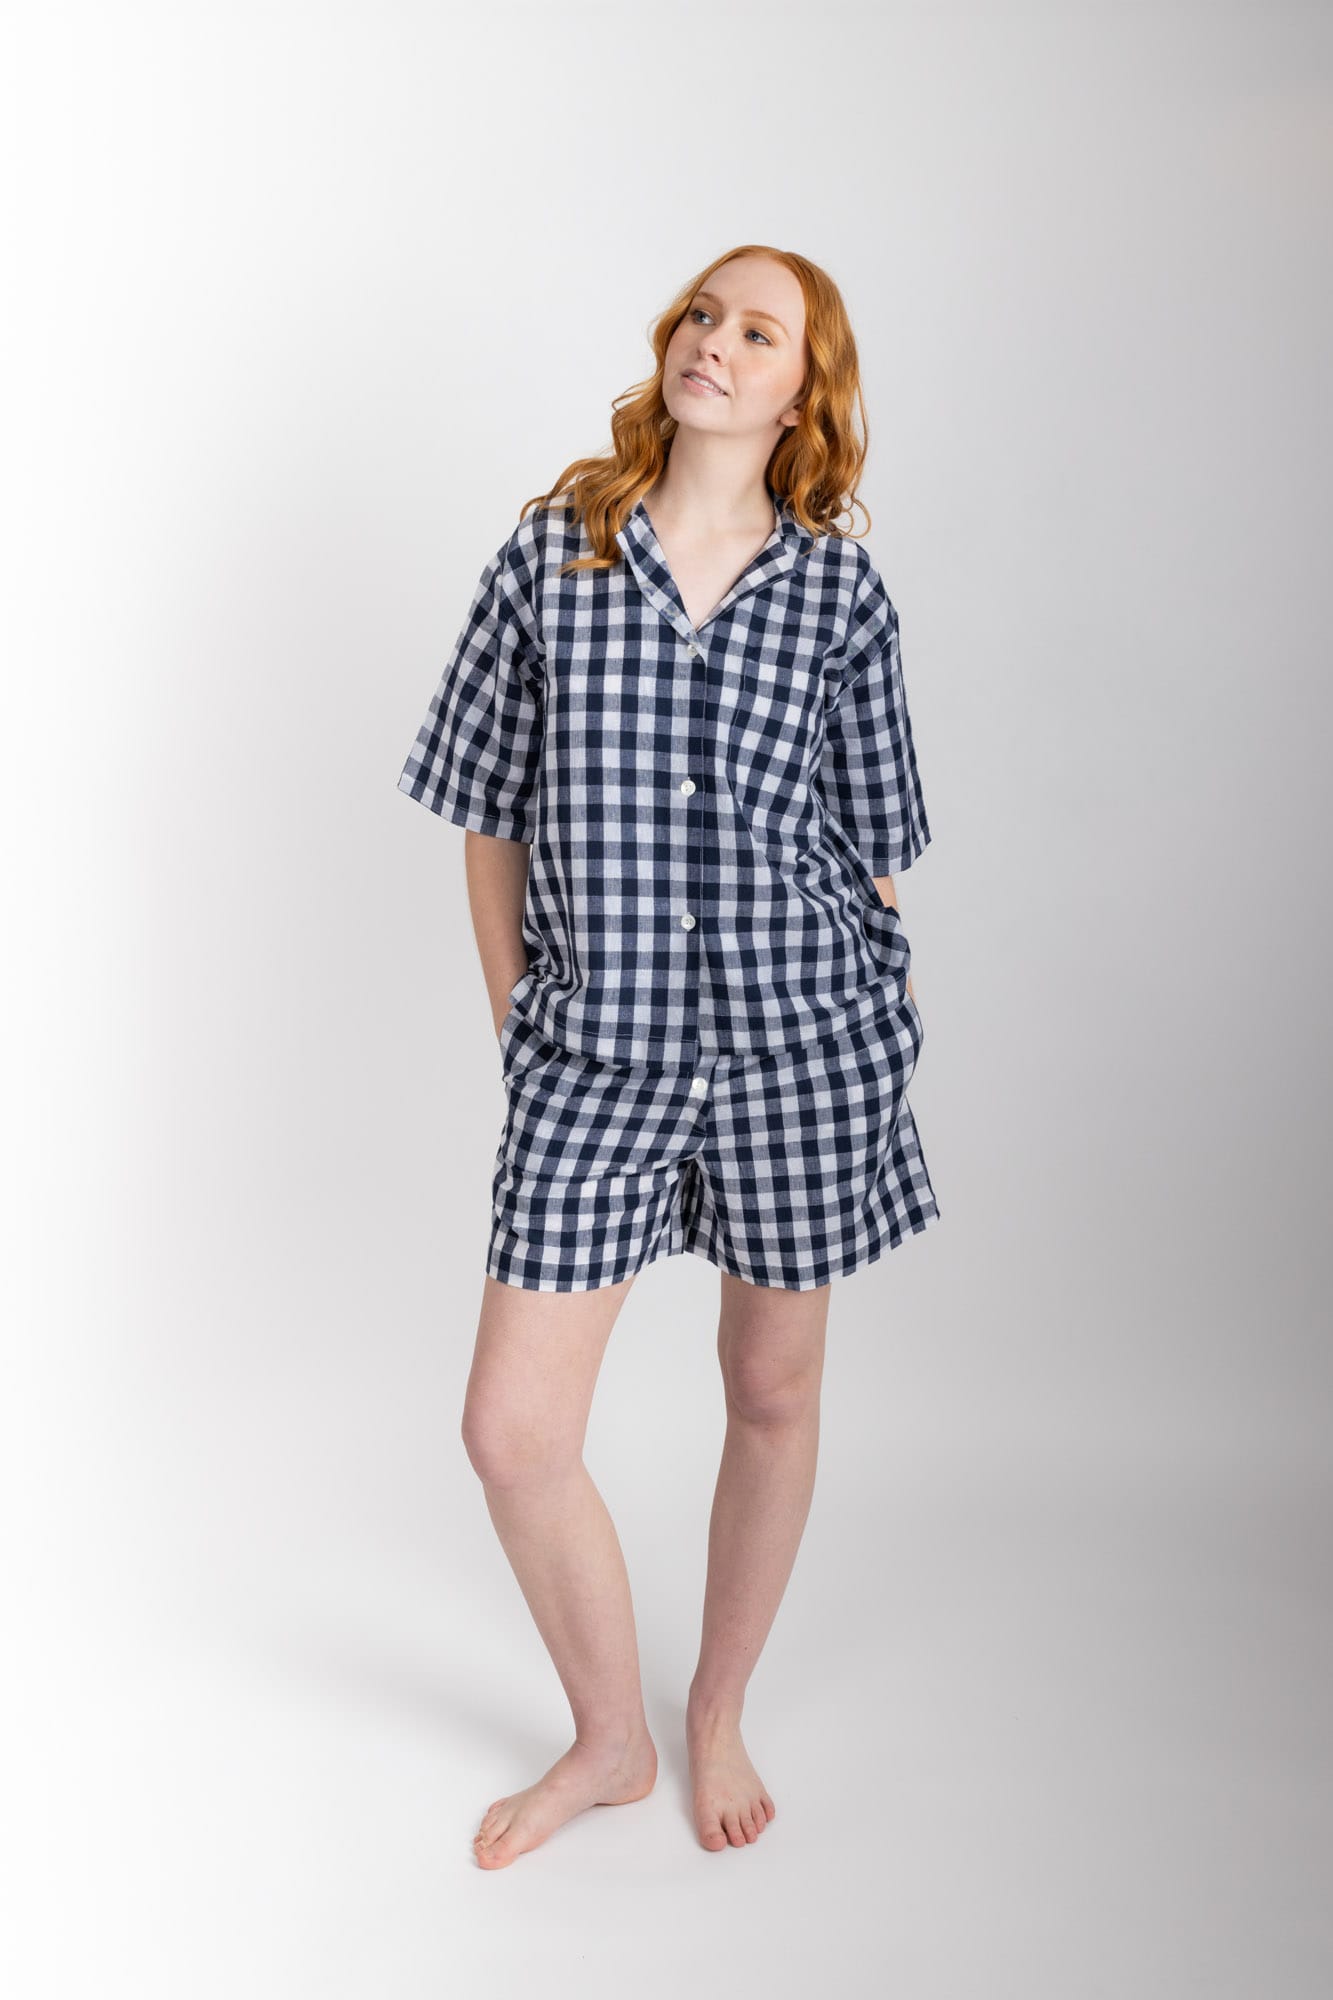 Women’s pyjama set including a short sleeve shirt and shorts. Made from an organic cotton and linen blend, in Navy check.  The shirt has shell buttons, a front pocket and a back pleat with locker loop detail.  The shorts feature natural shell buttons and an elasticated waistband for comfort.